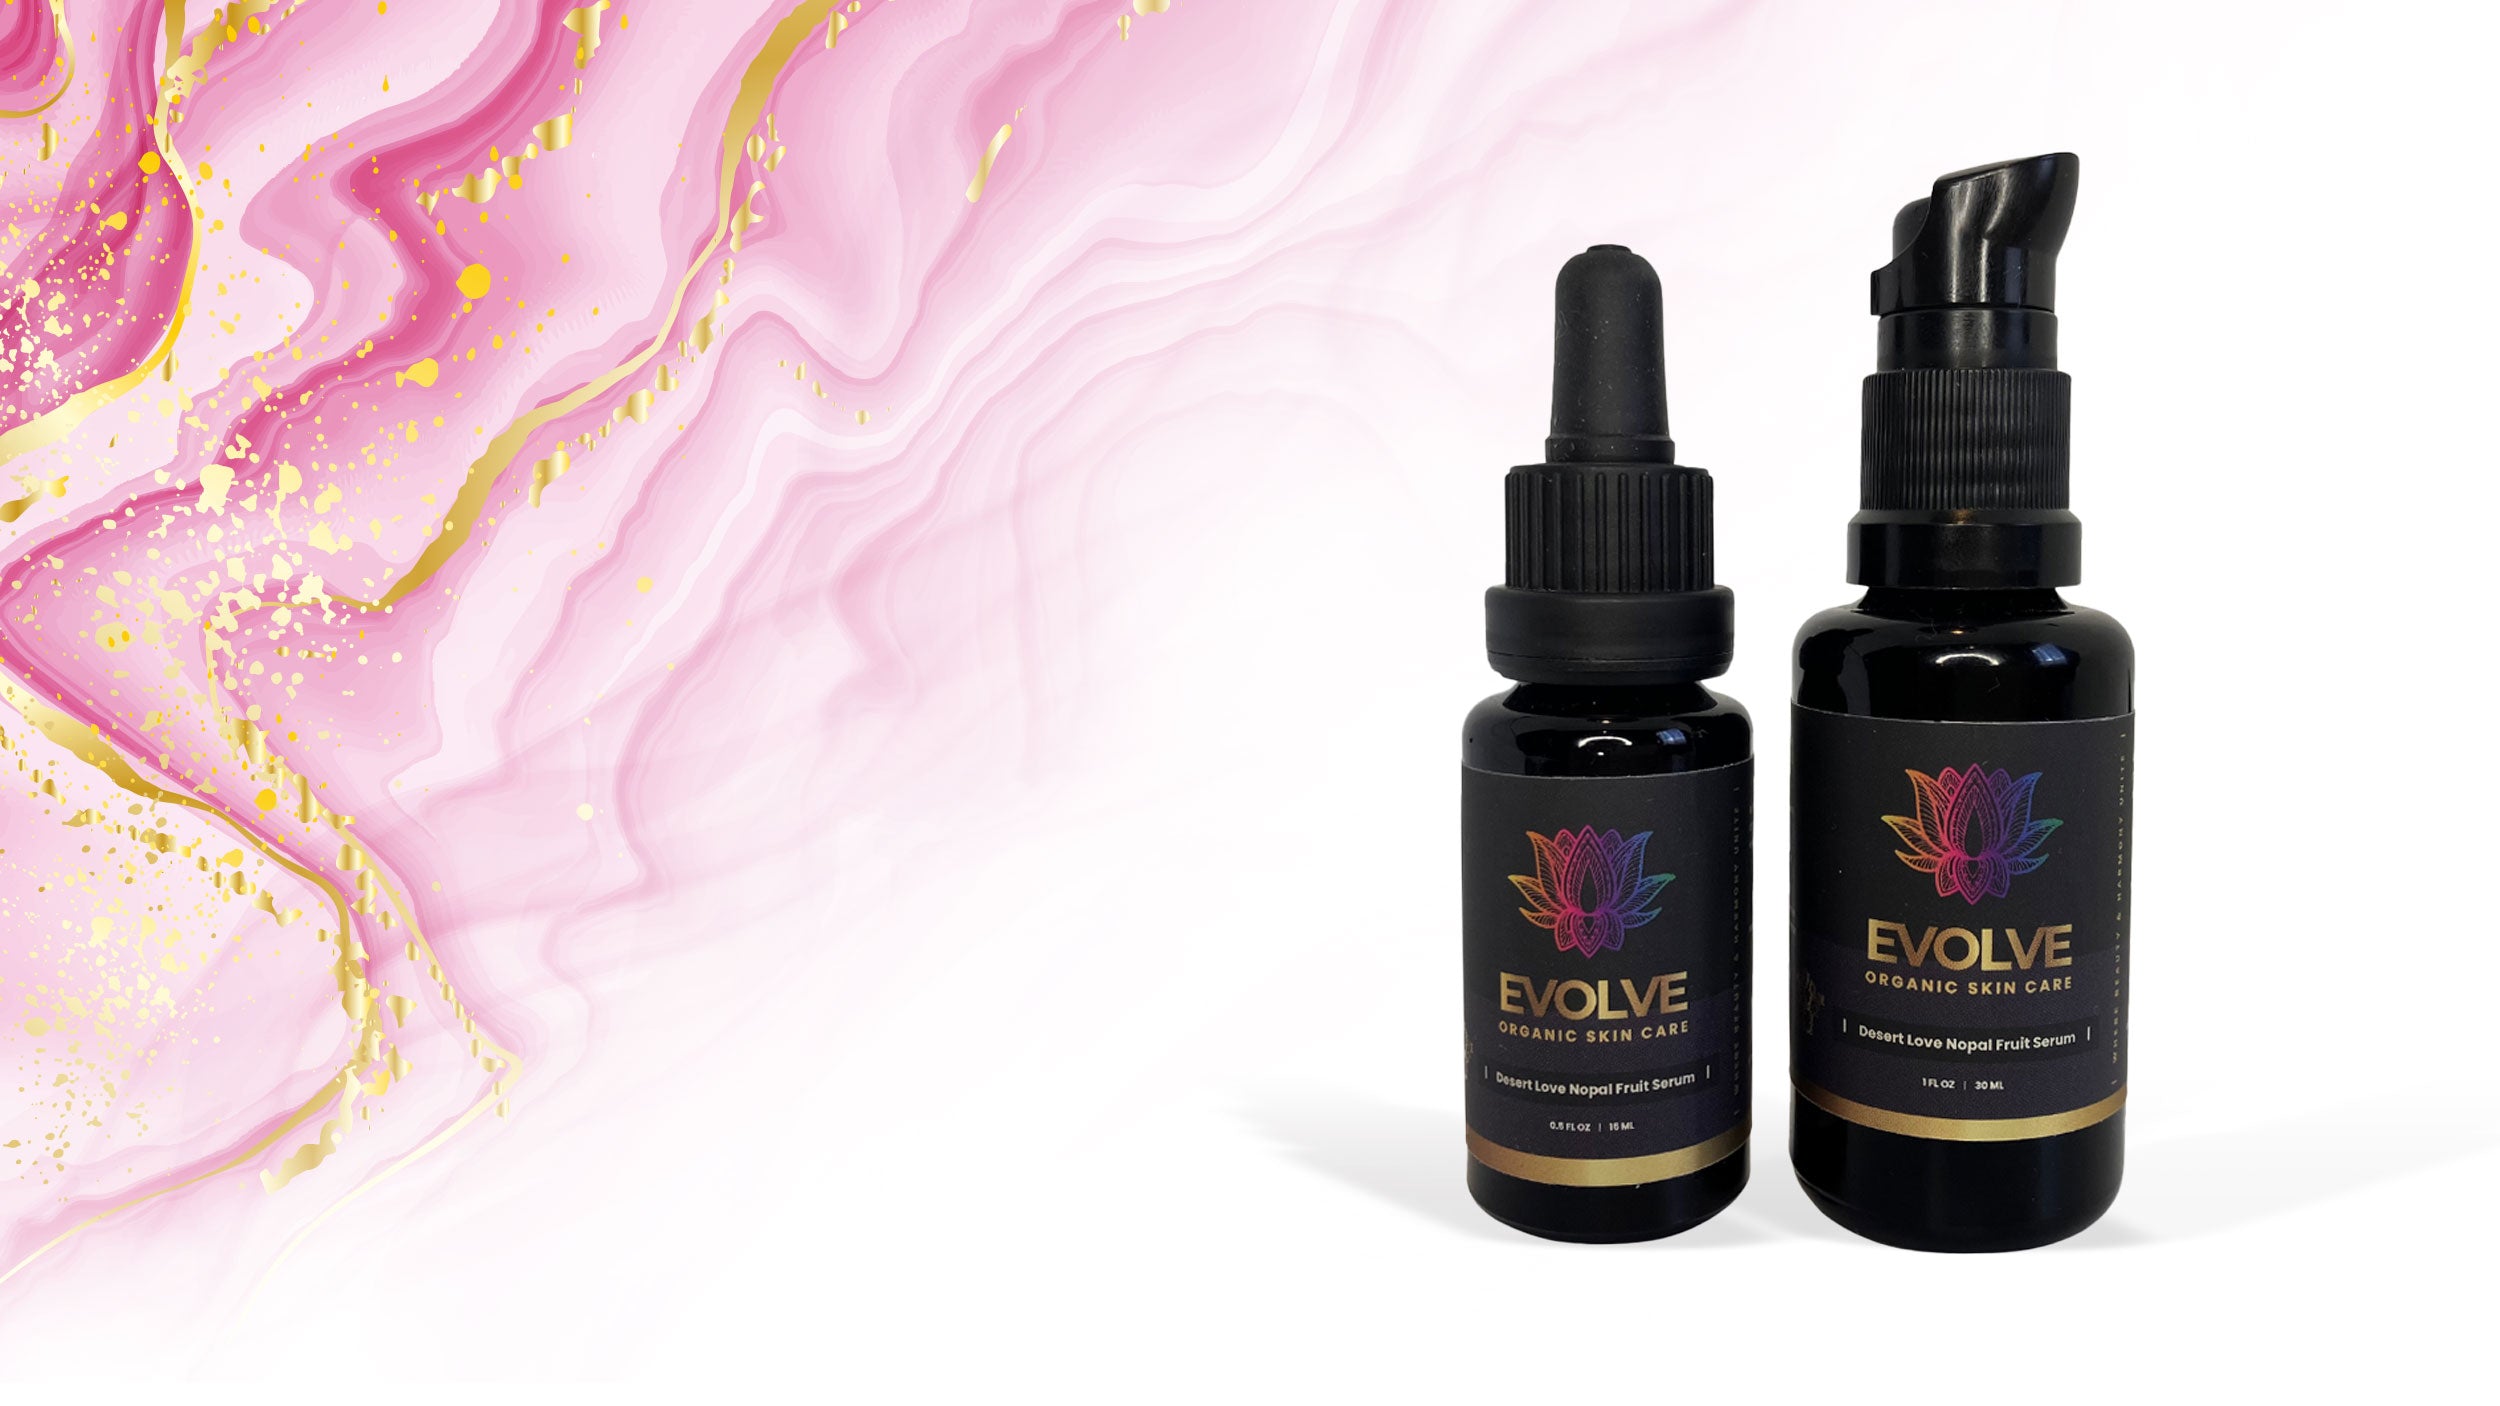 a photo of evolve organic skin care products in front of a pink marble background